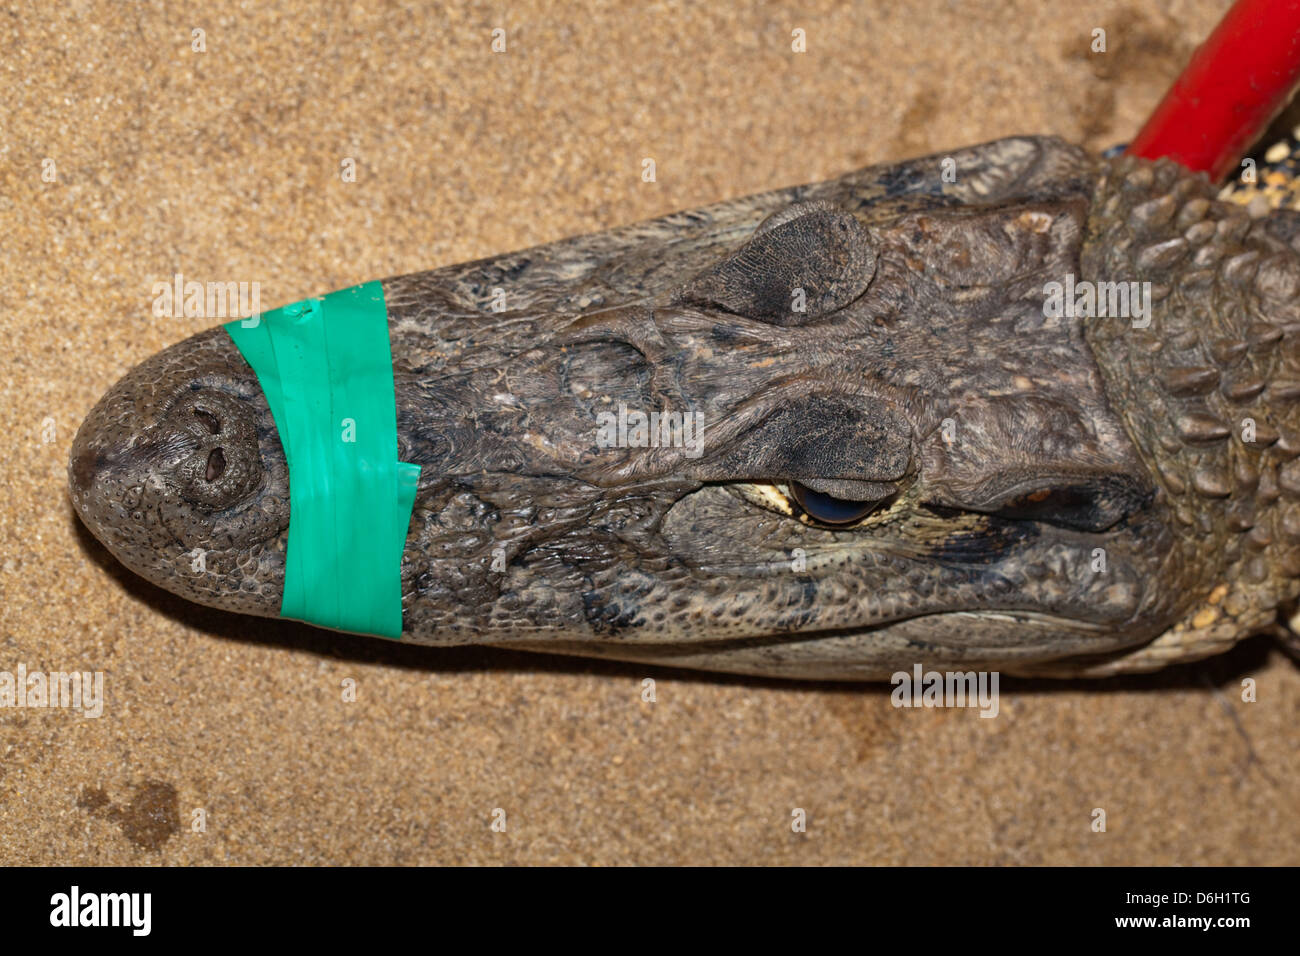 Black Caiman (Melanosuchus niger). Head. Jaws taped for safety of researcher whilst taking measurements. Stock Photo